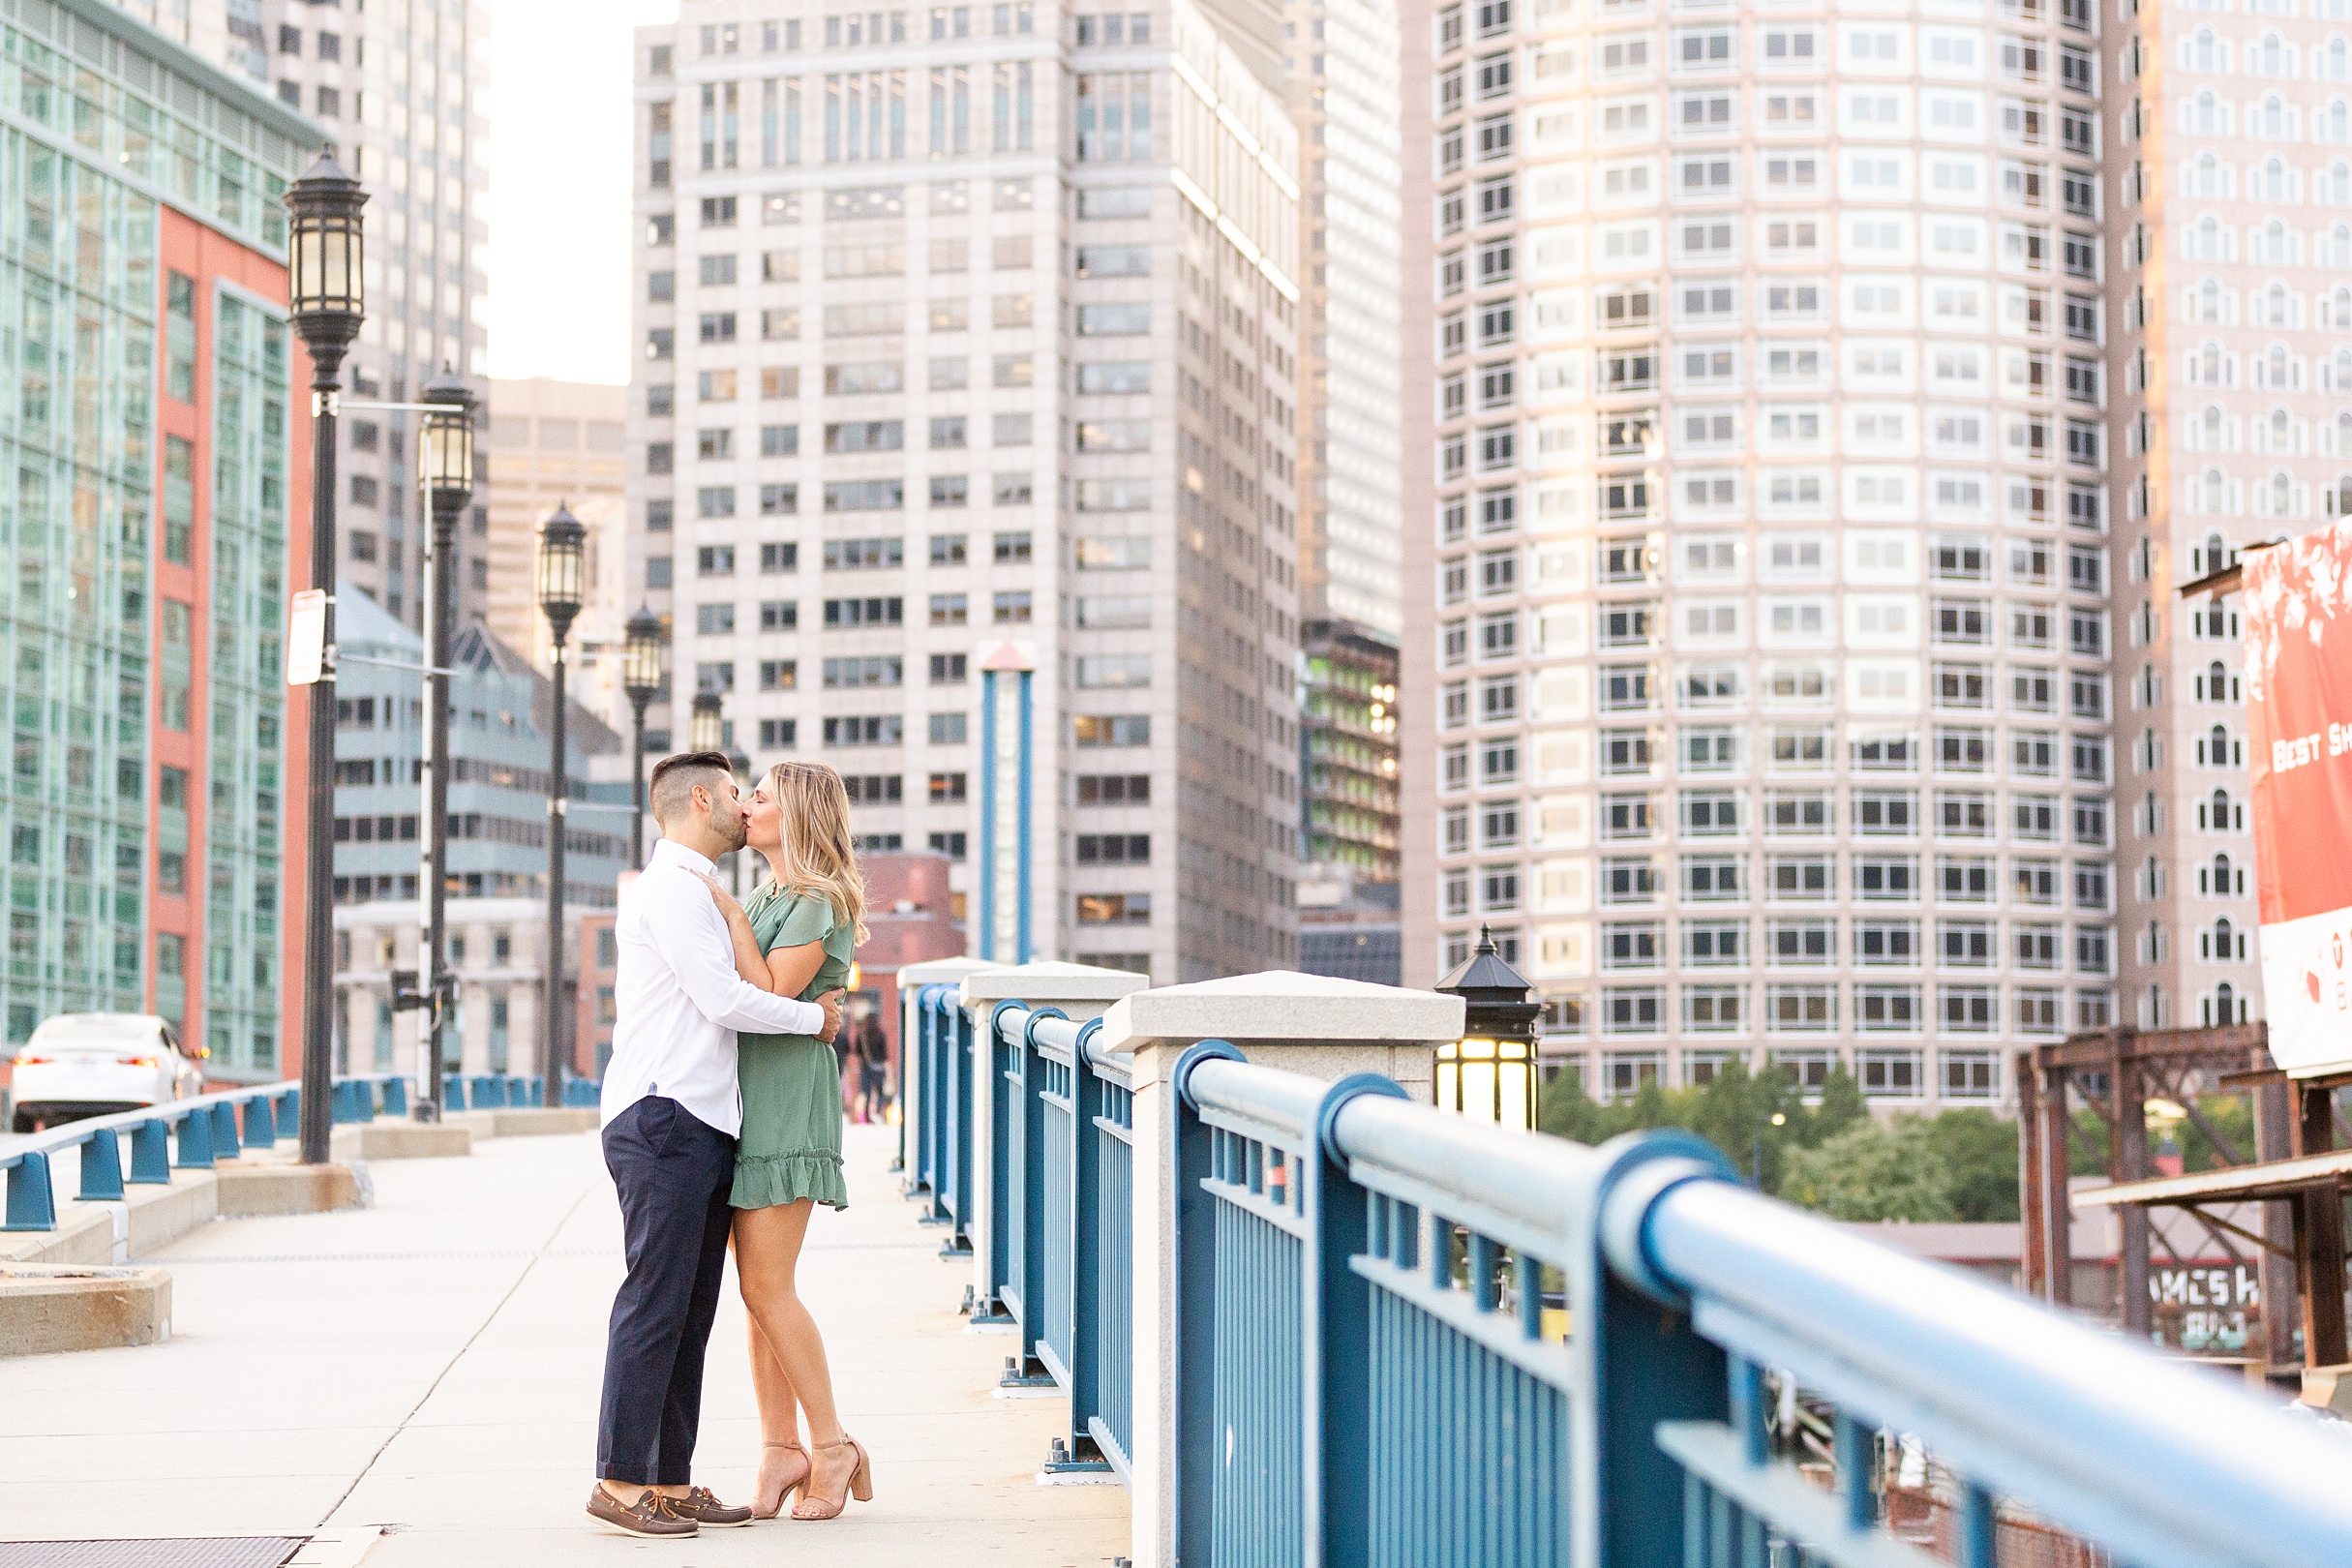 The Seaport Boston is the best area for engagement pictures, with both city and building backdrops and also the waterfront and Boston Harbor.